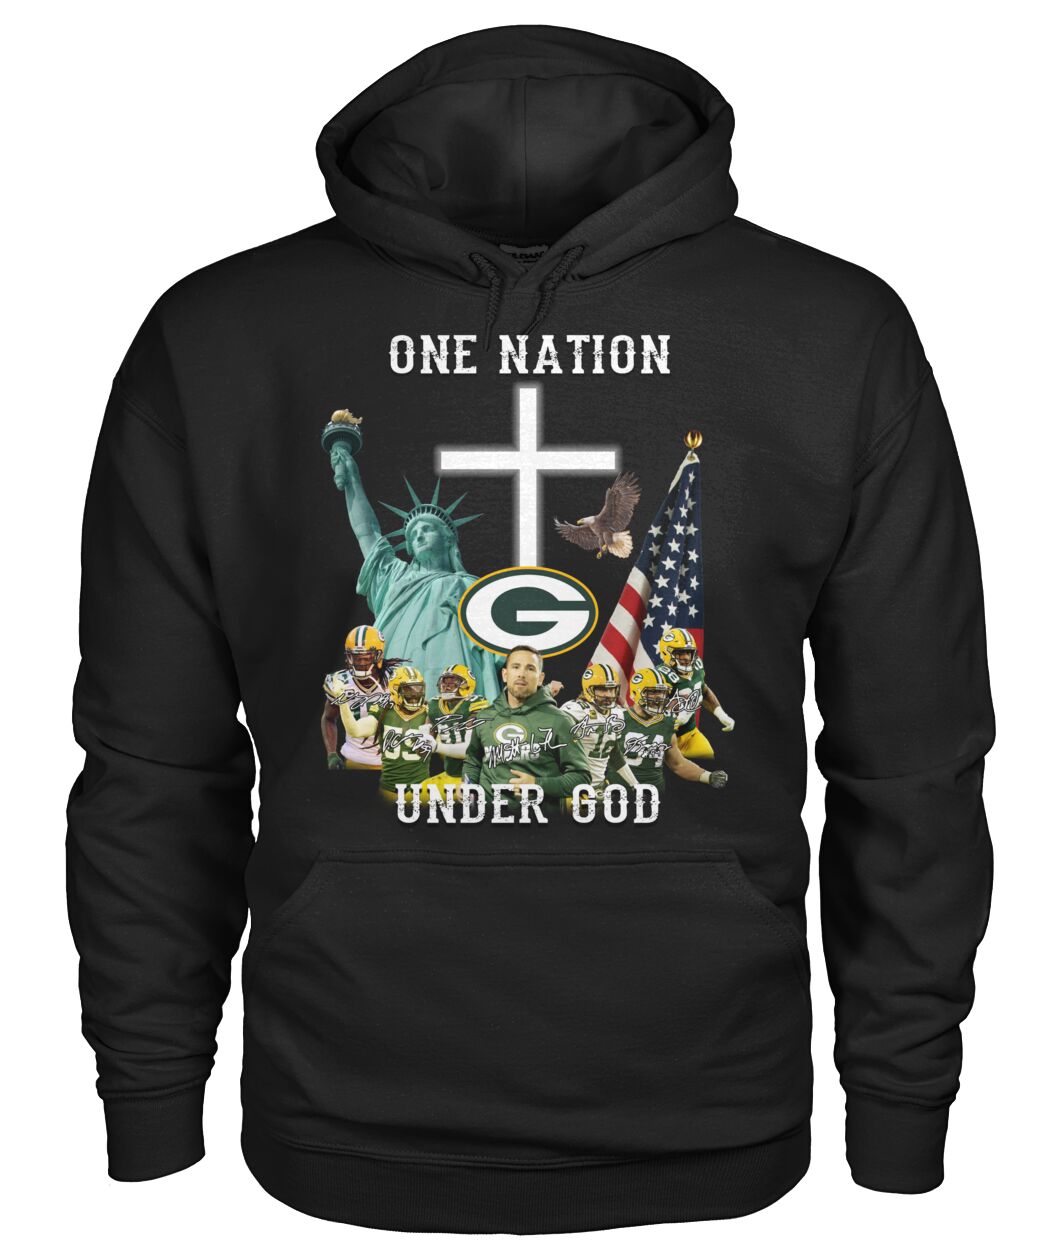 Green Bay Packers One Nation under God shirt hoodie 4